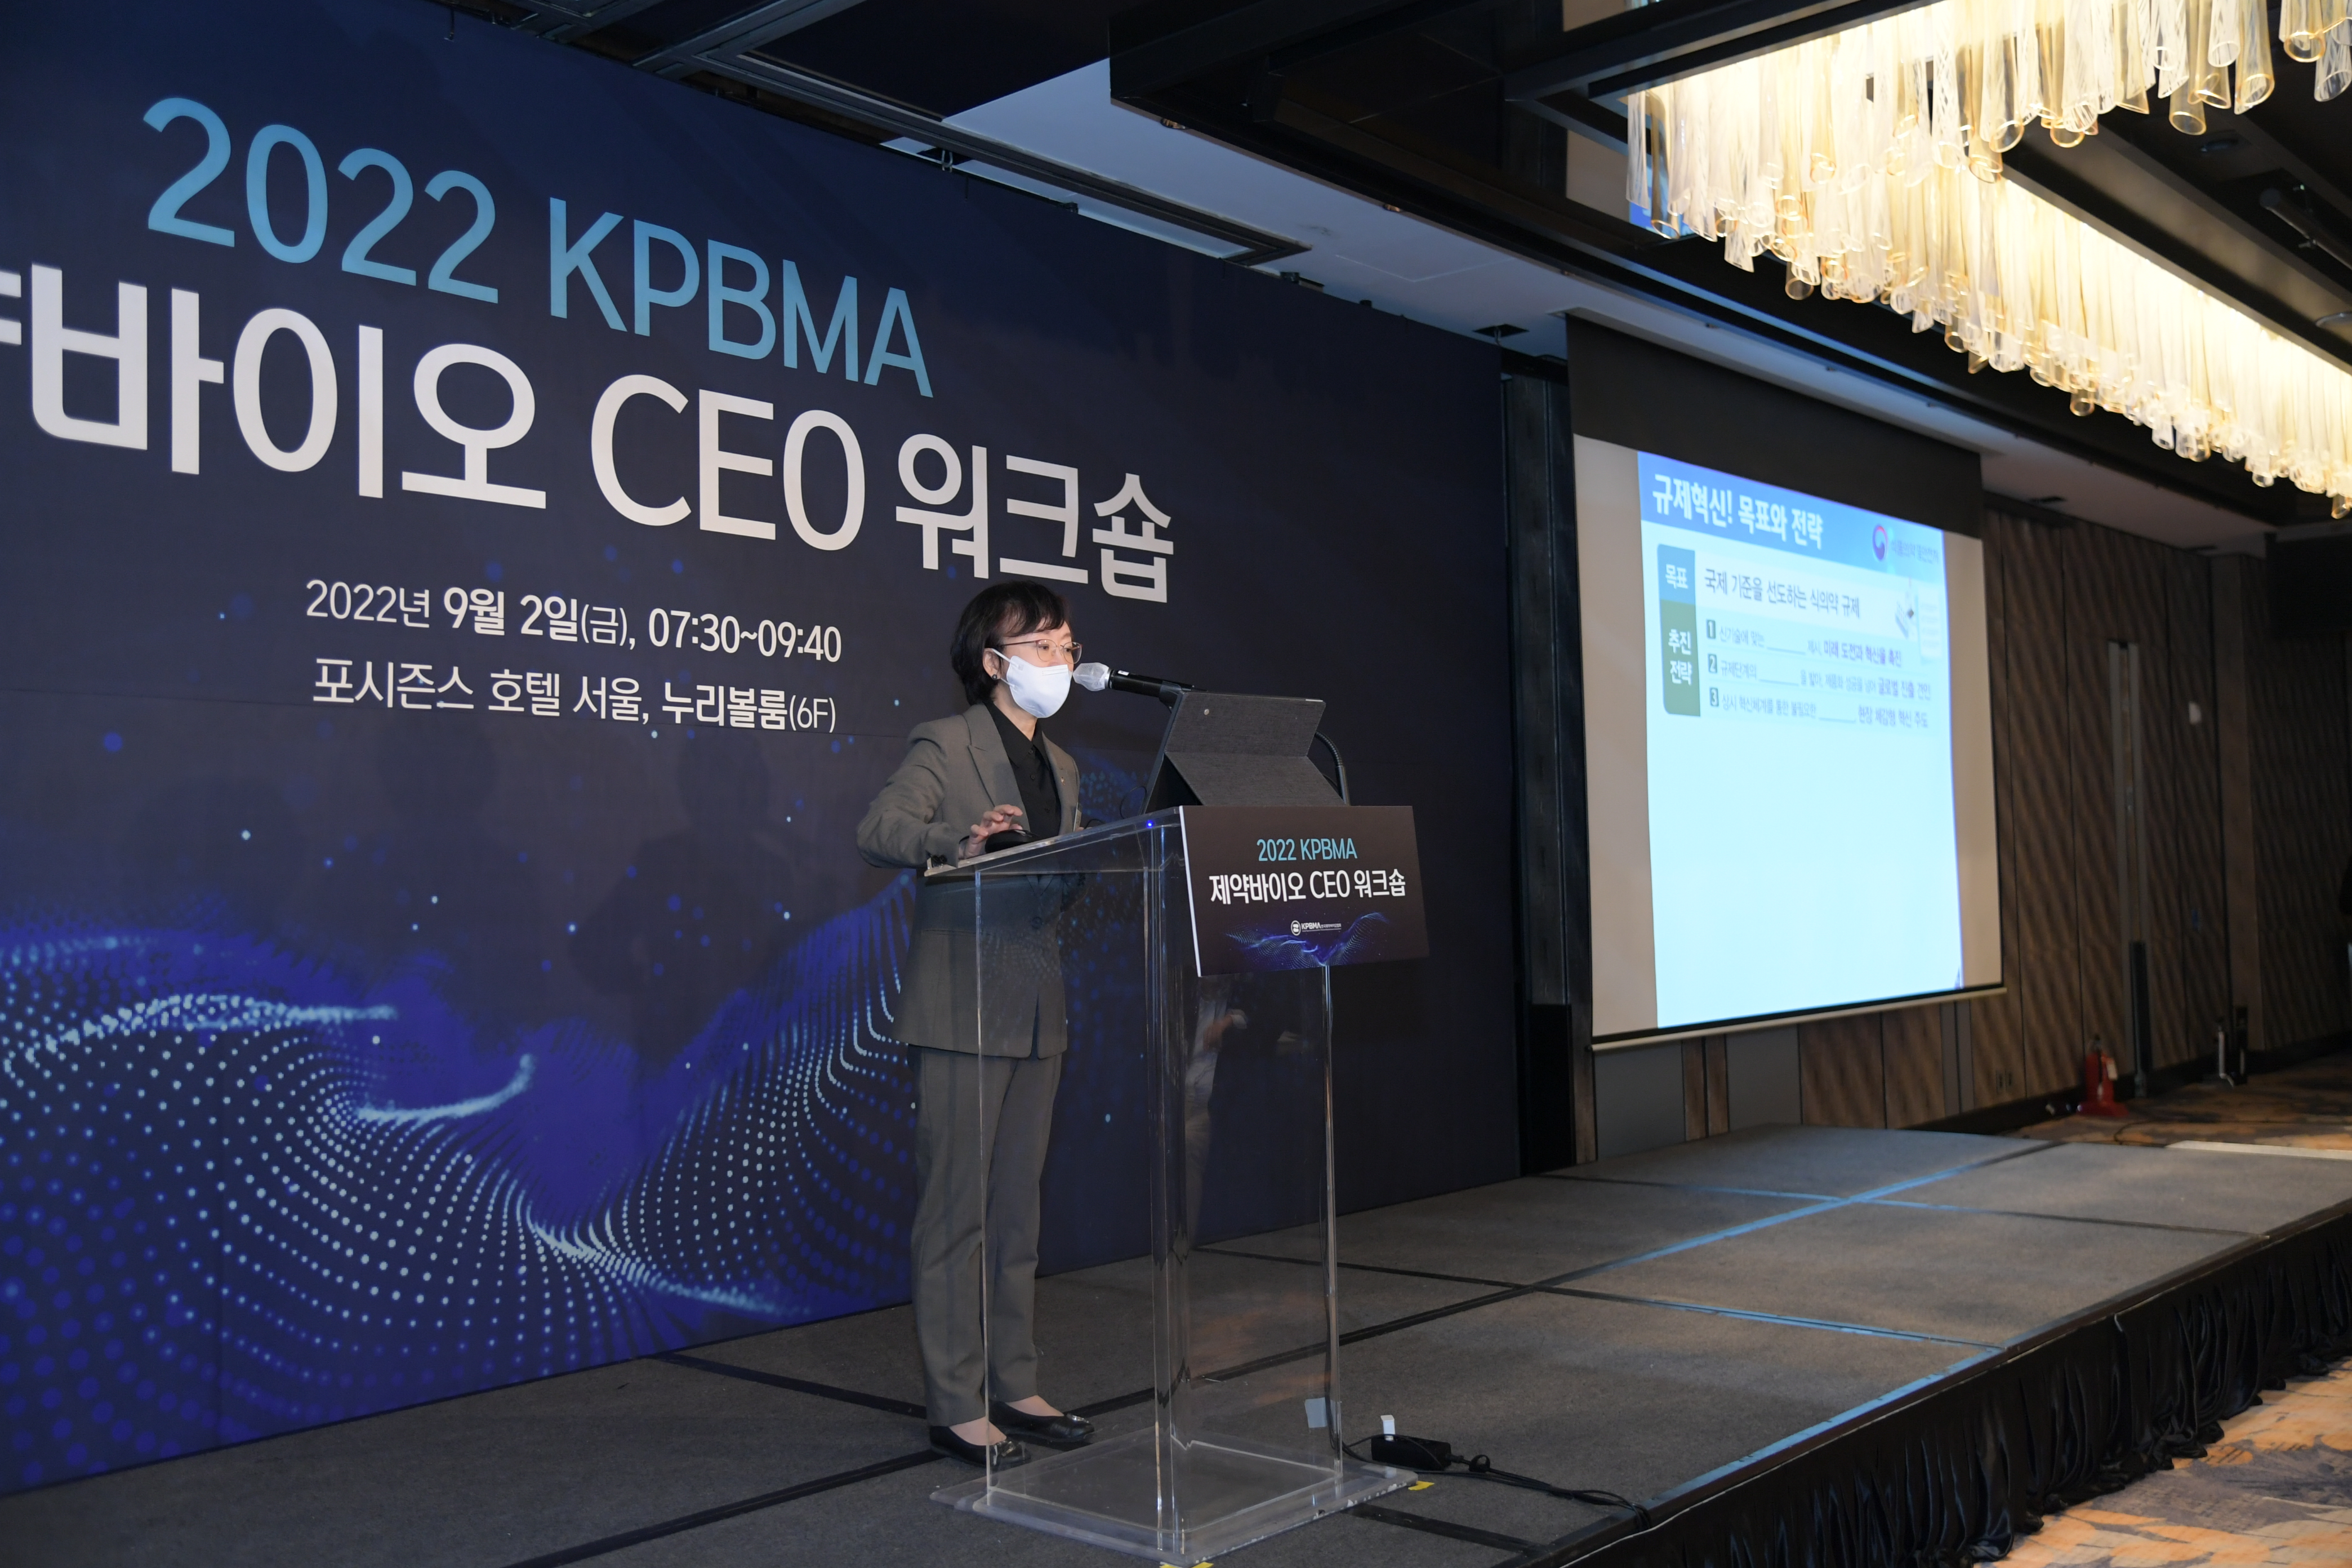 Photo News4 - [Sept. 2, 2022] Minister Attends 2022 KPBMA Pharmaceutical and Bio-Pharma CEO Workshop